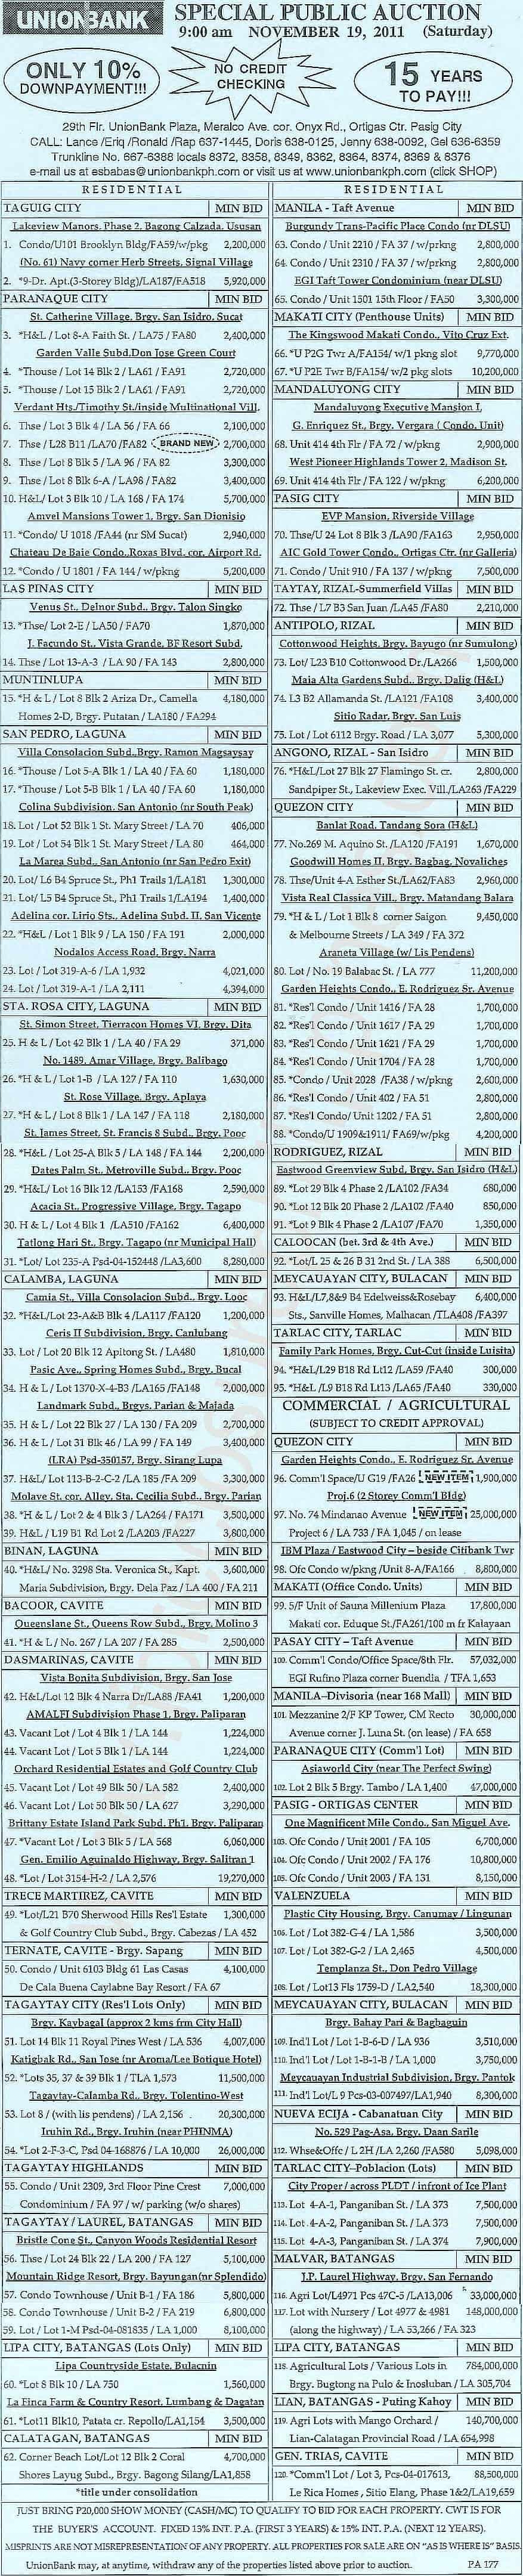 177th Unionbank foreclosed properties auction on November 19, 2011